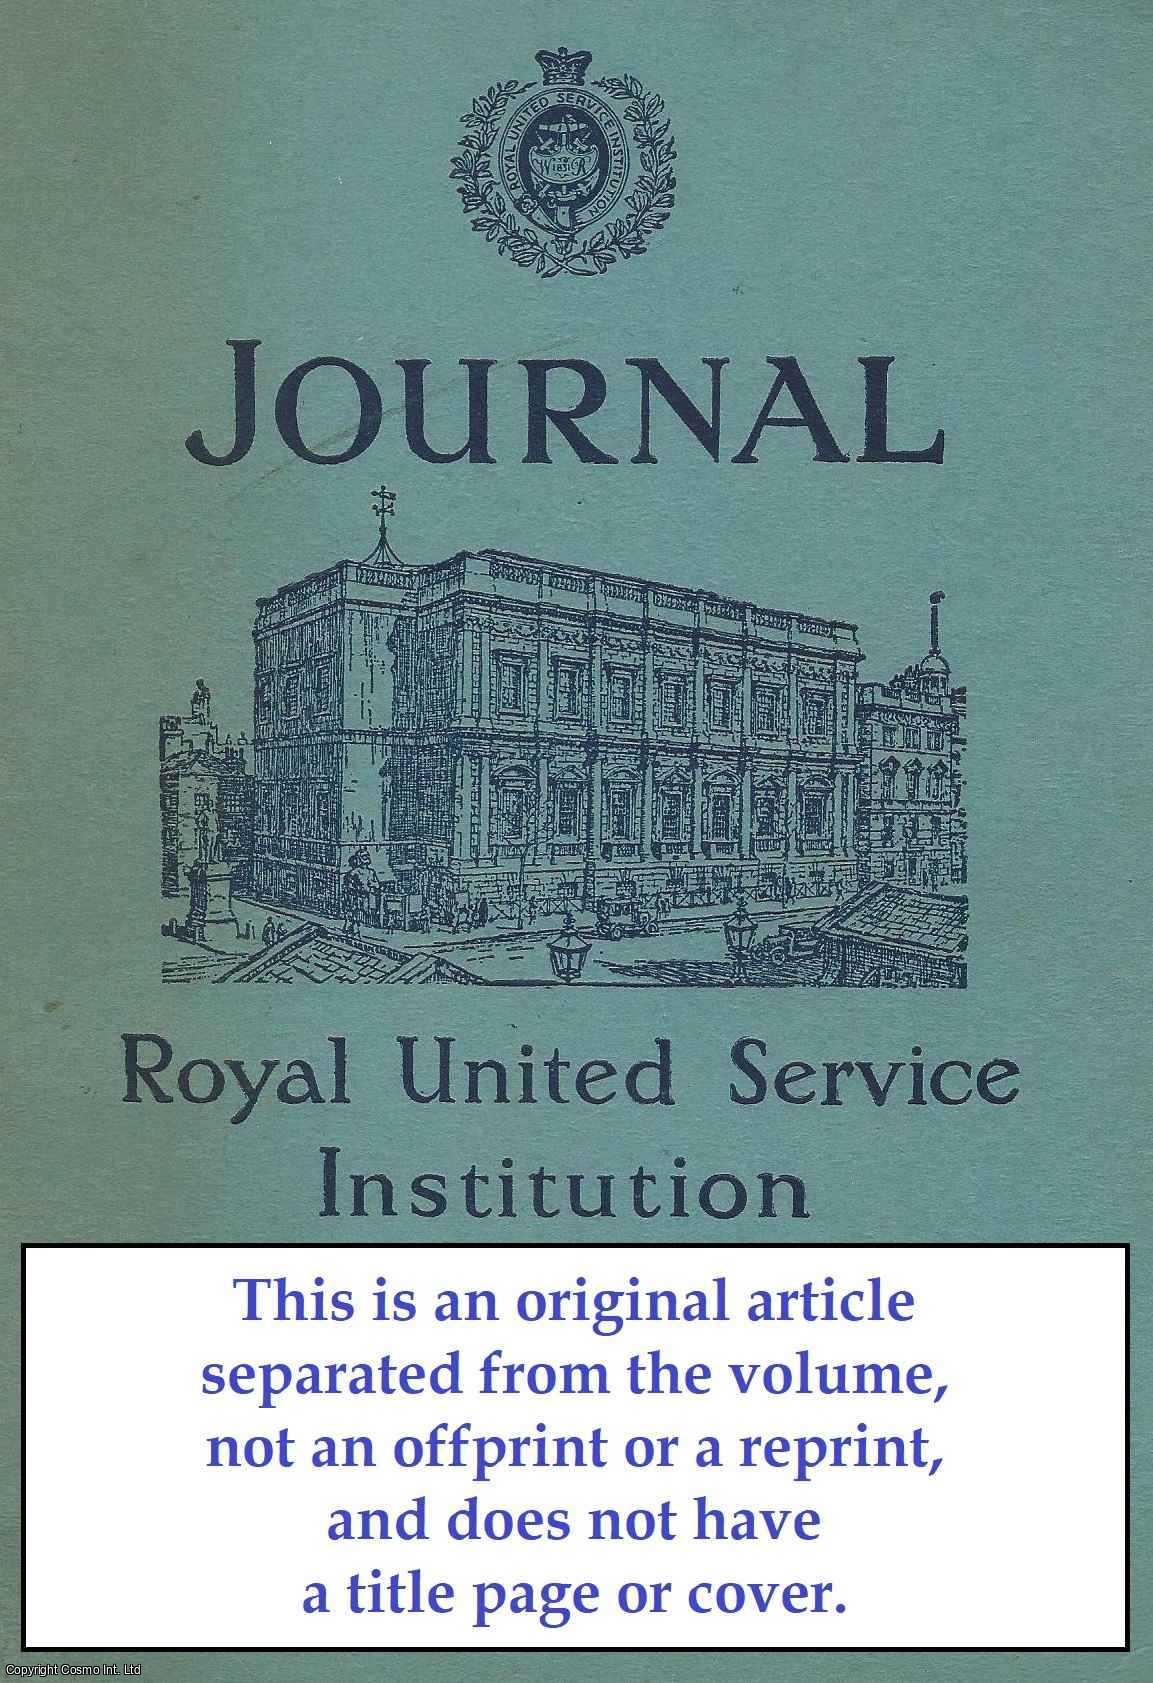 F. W. E. Fursdon - The Rationalization of Higher Officer Training in The British Army. An original article from The Royal United Service Institution Journal, 1964.